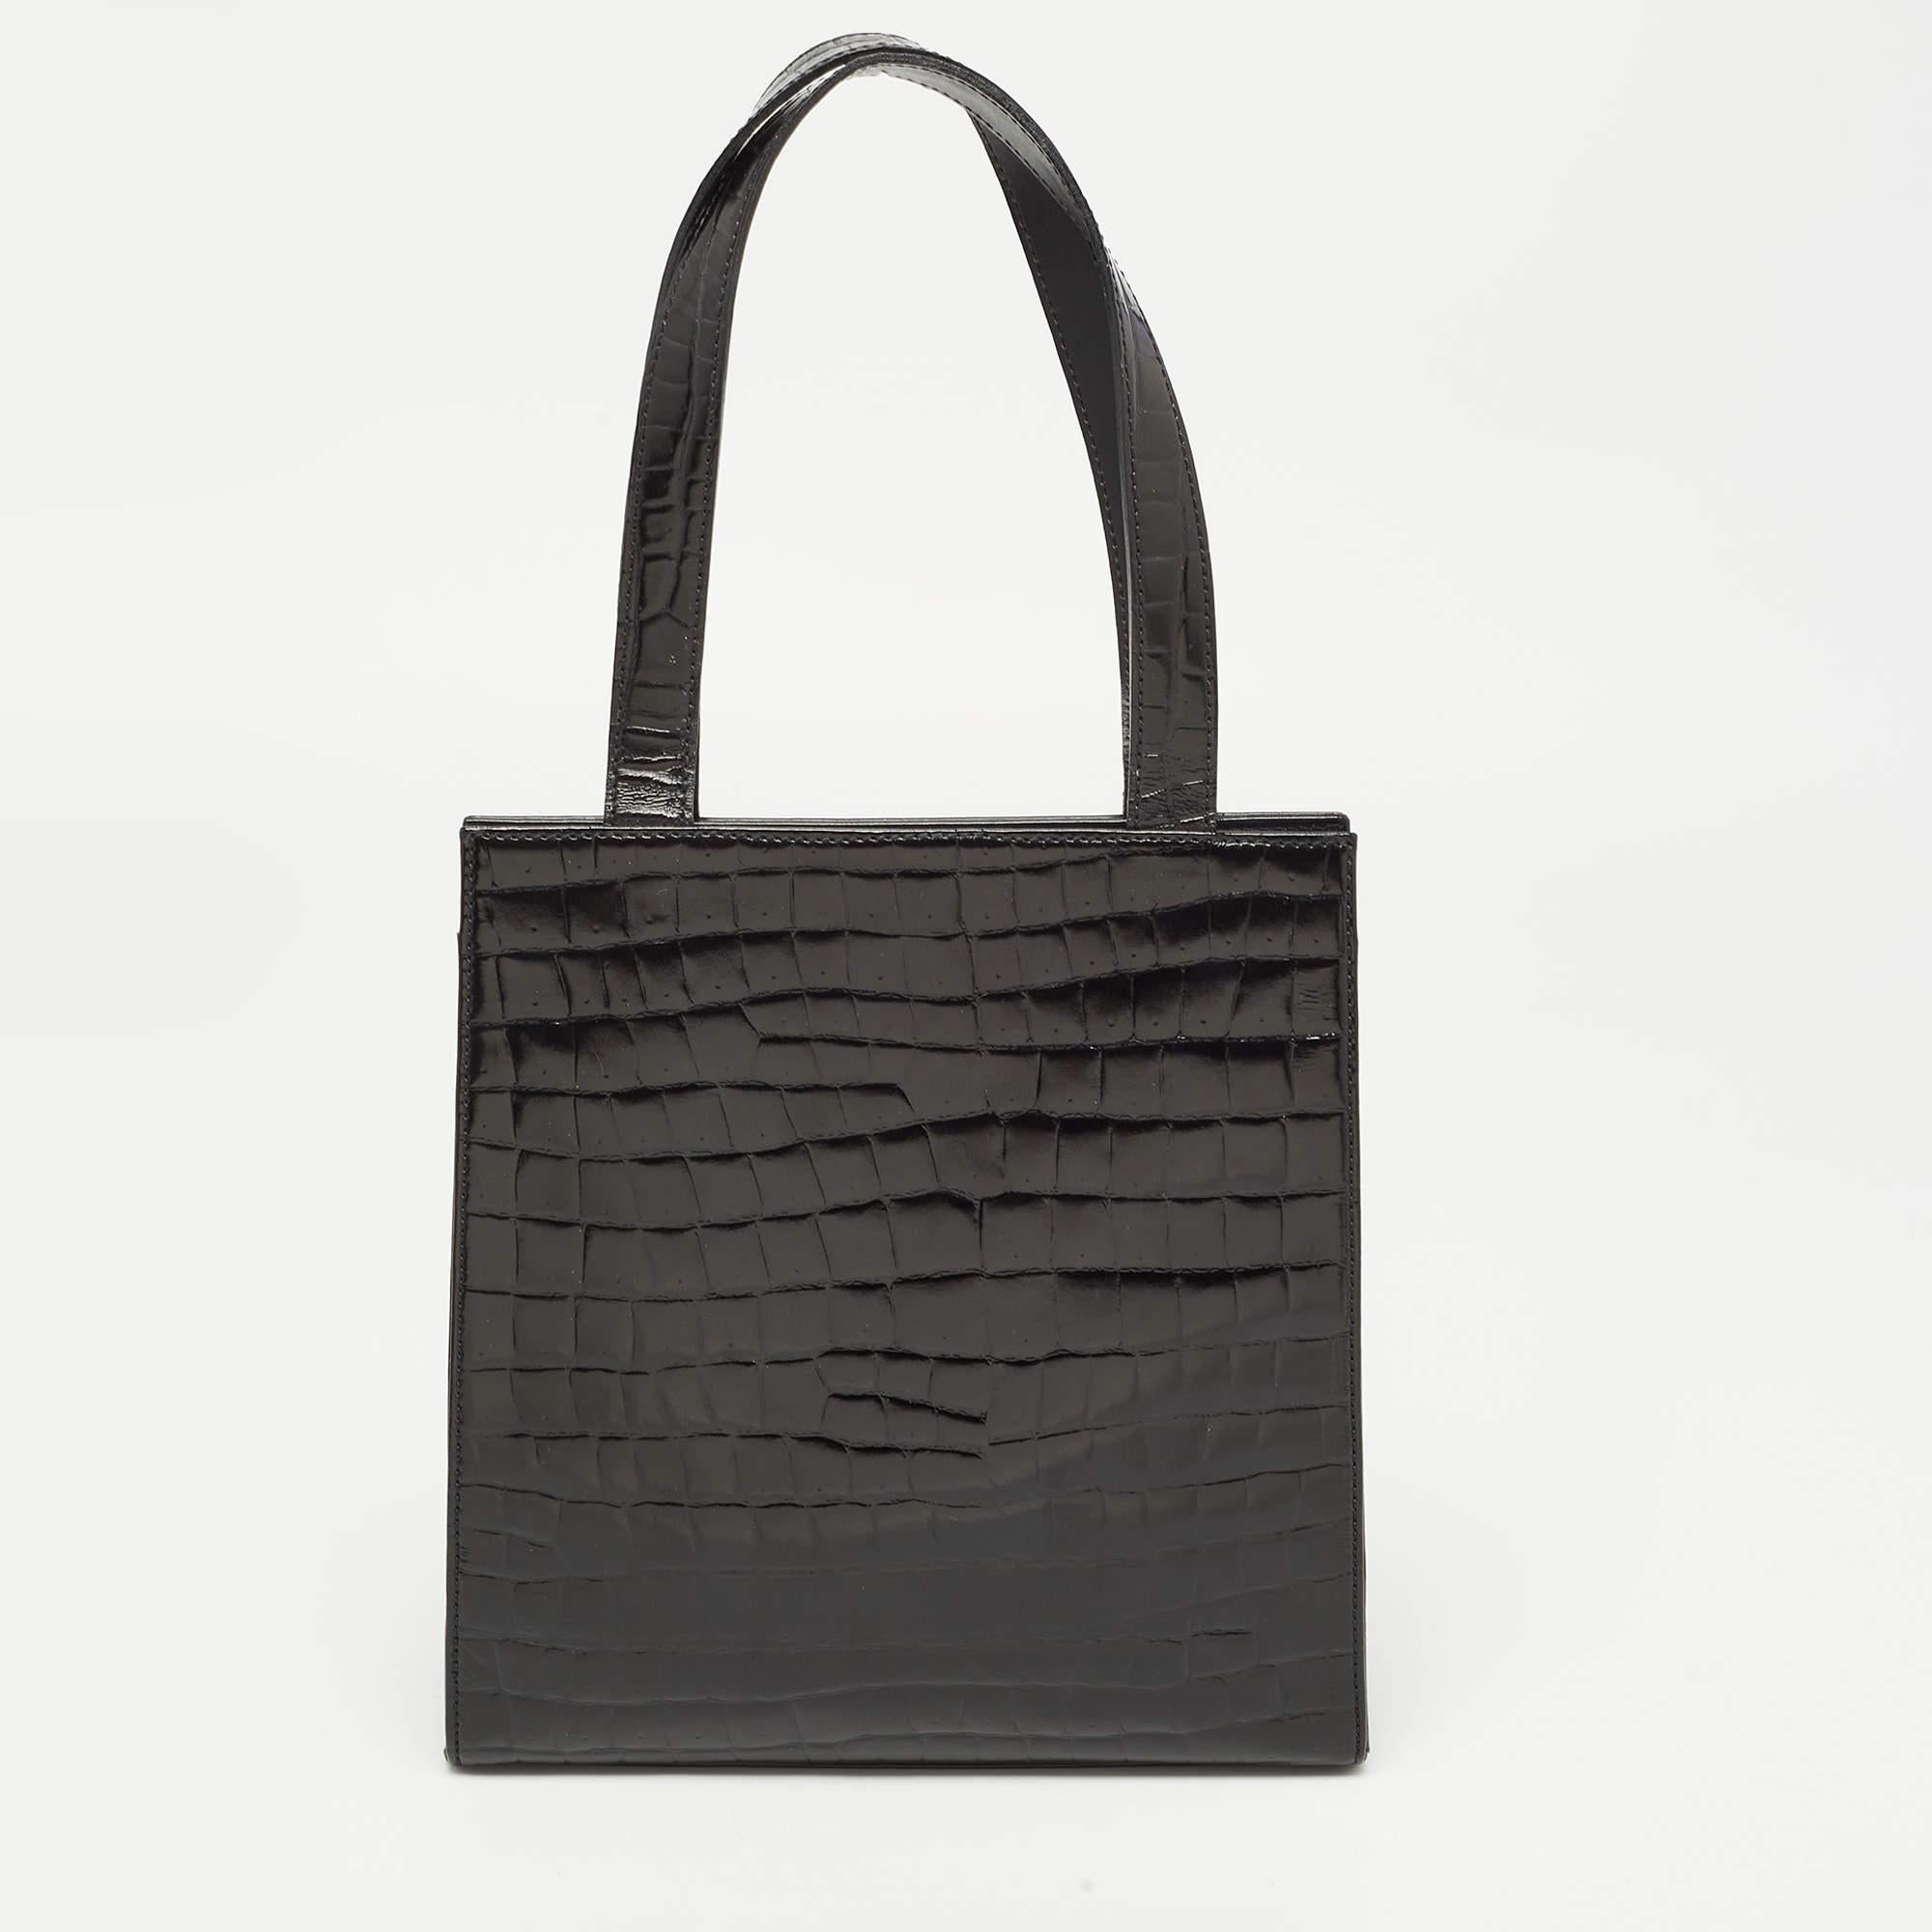 Created from high-quality materials, this Yves Saint Laurent tote is enriched with functional and classic elements. It can be carried around conveniently, and its interior is perfectly sized to keep your belongings with ease.

